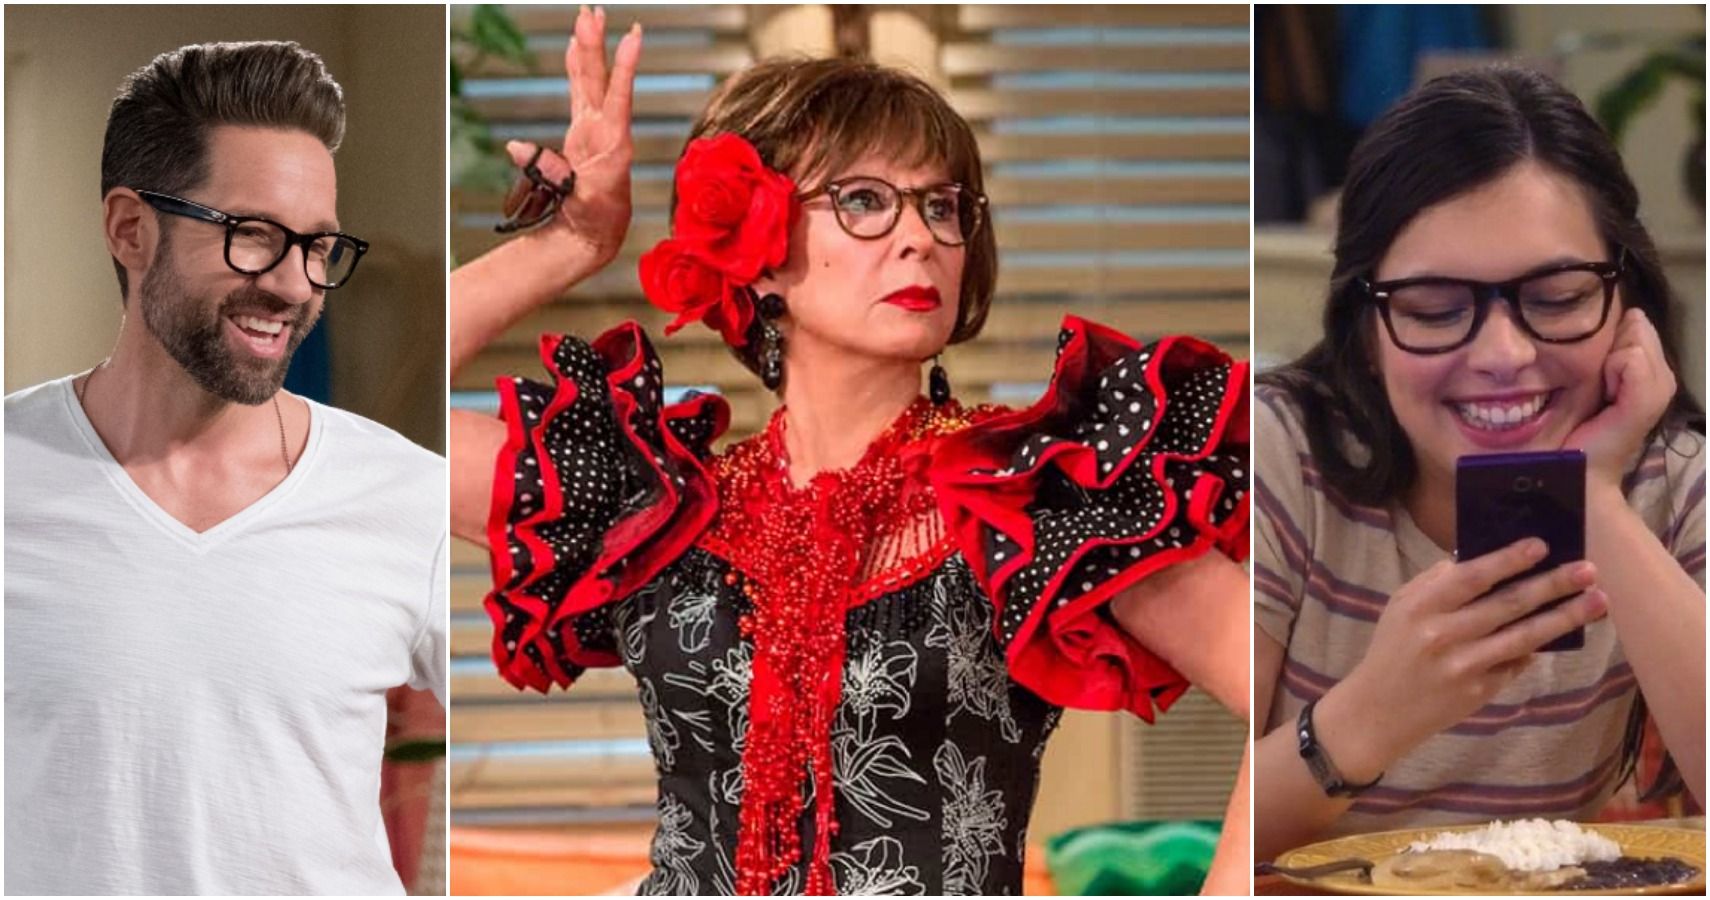 The 10 Worst Episodes Of One Day At A Time According To IMDb